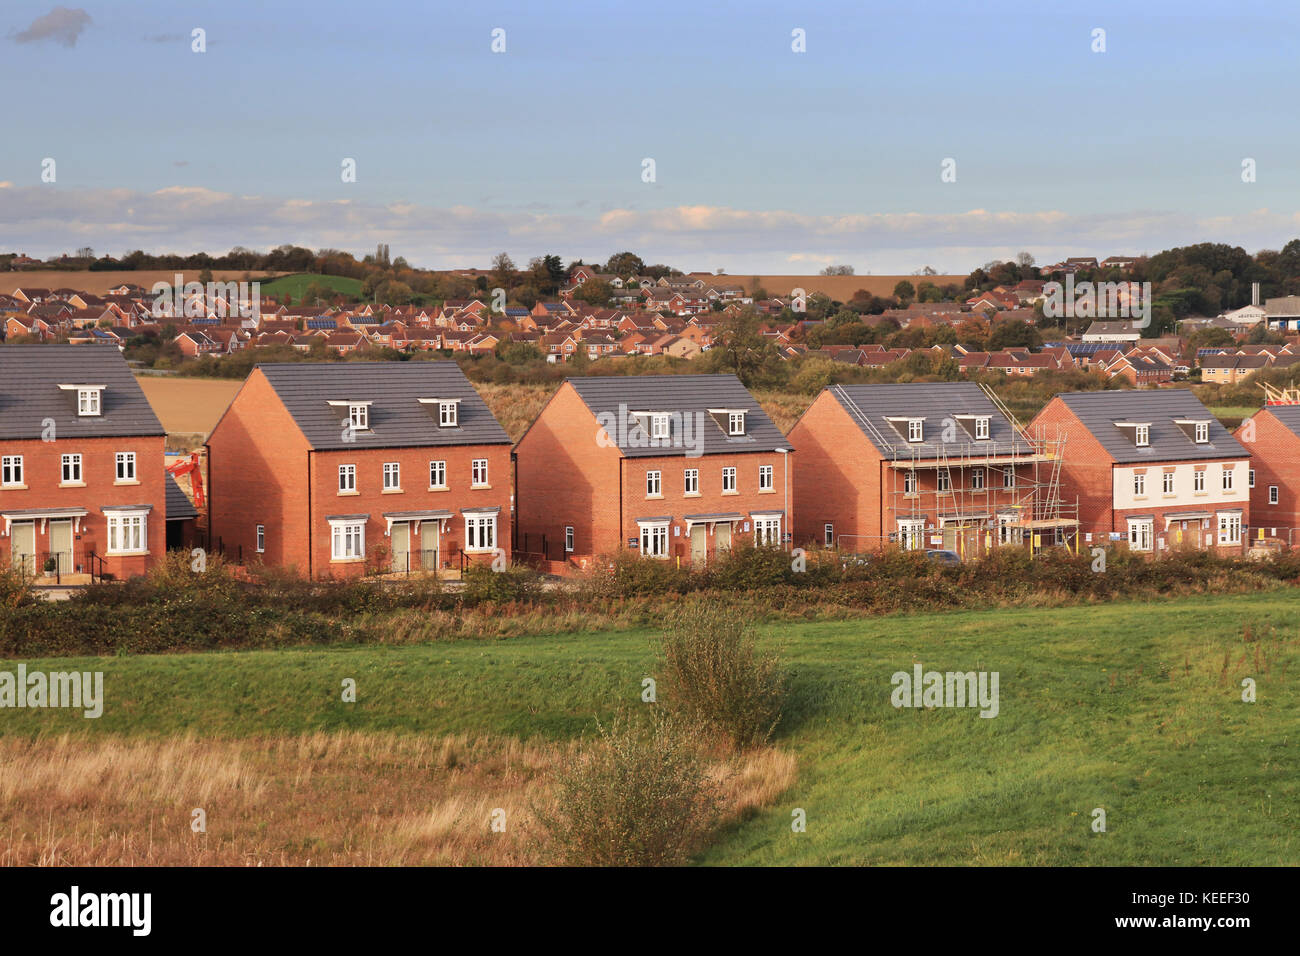 New houses for sale, Grantham, Lincolnshire,England, UK Stock Photo